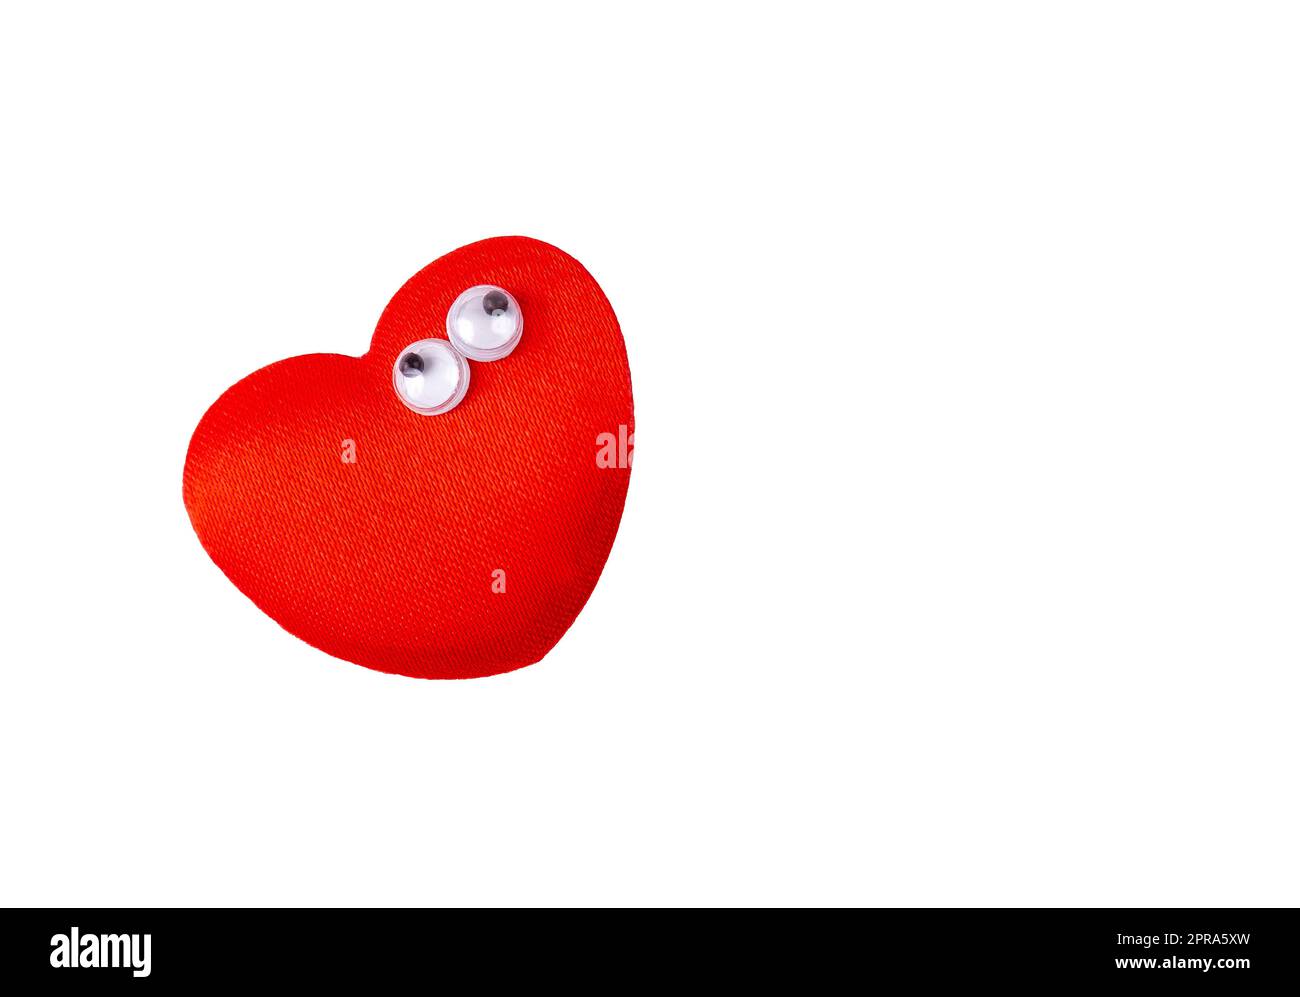 One single little funny quirky red heart with small googly eyes, object isolated on white background, cut out, nobody. Love symbol concept, single des Stock Photo